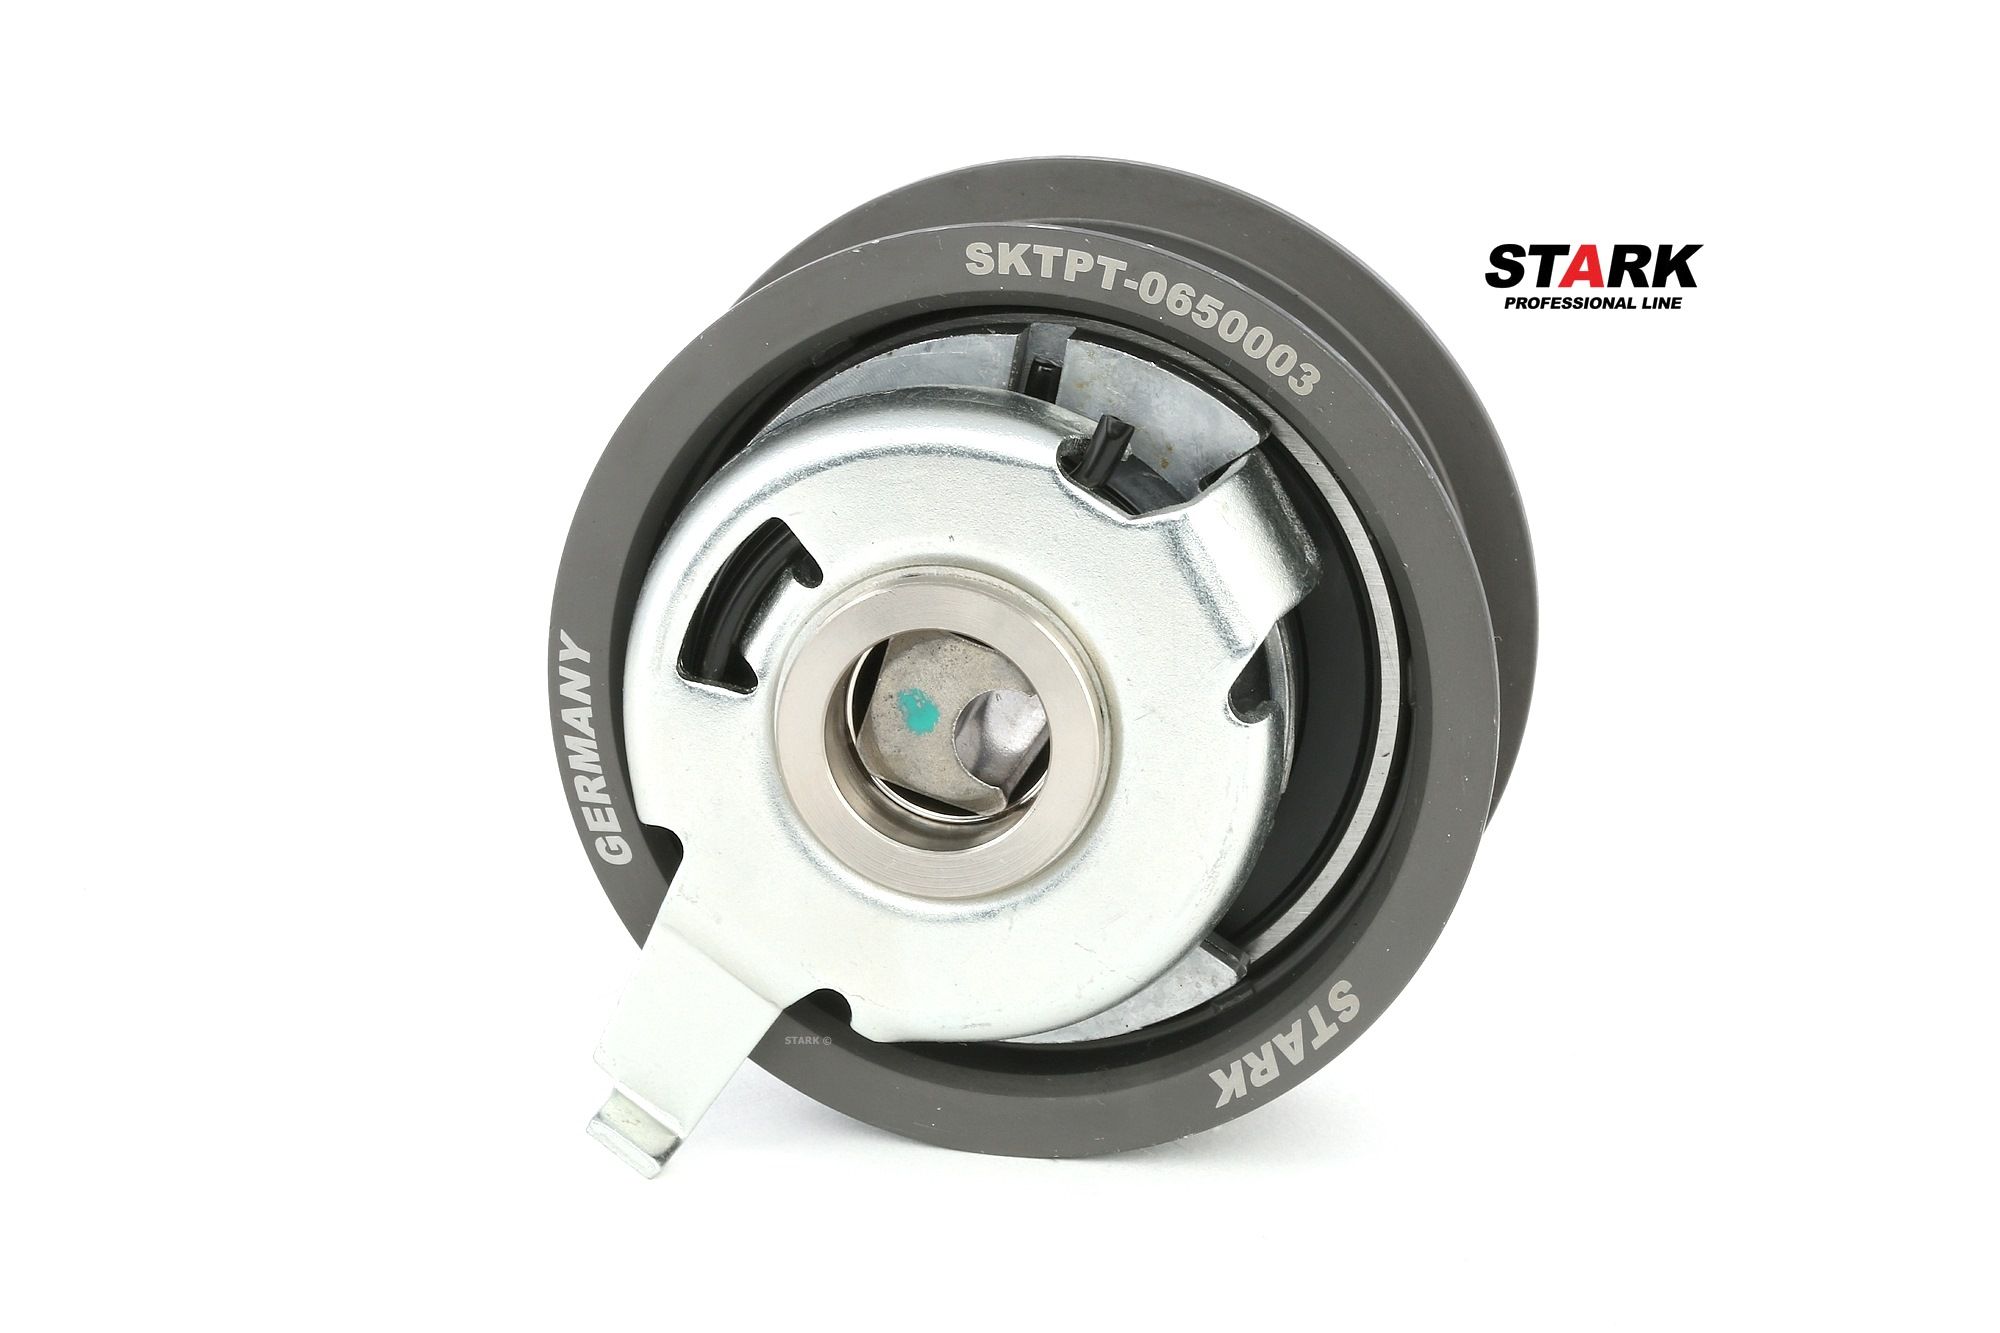 Original SKTPT-0650003 STARK Timing belt tensioner pulley experience and price